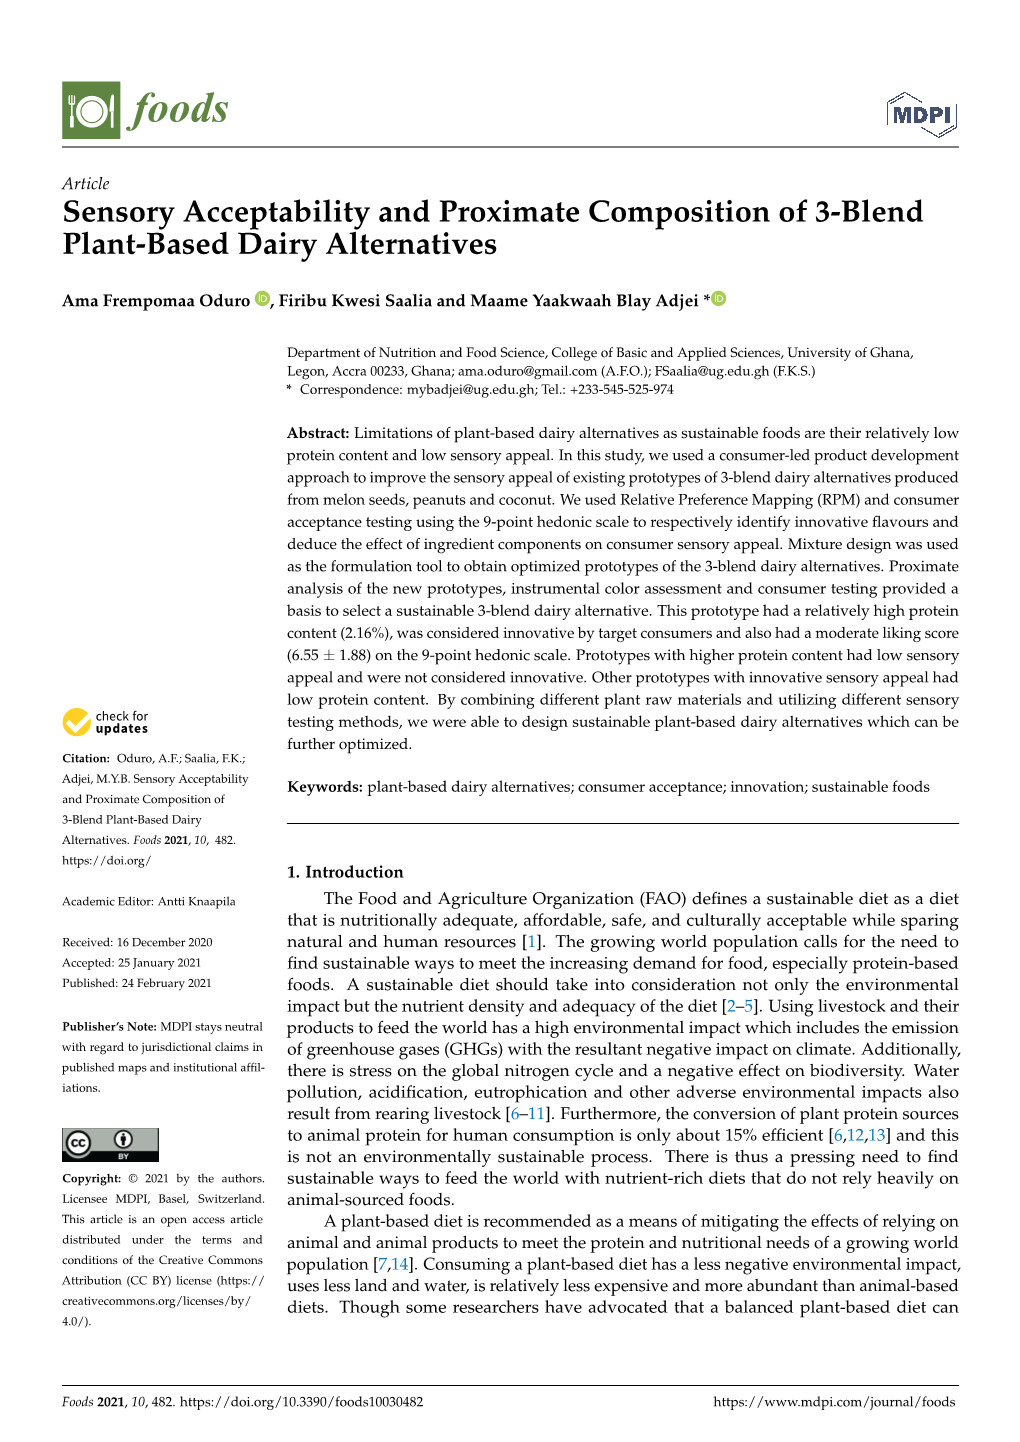 Sensory Acceptability and Proximate Composition of 3-Blend Plant-Based Dairy Alternatives